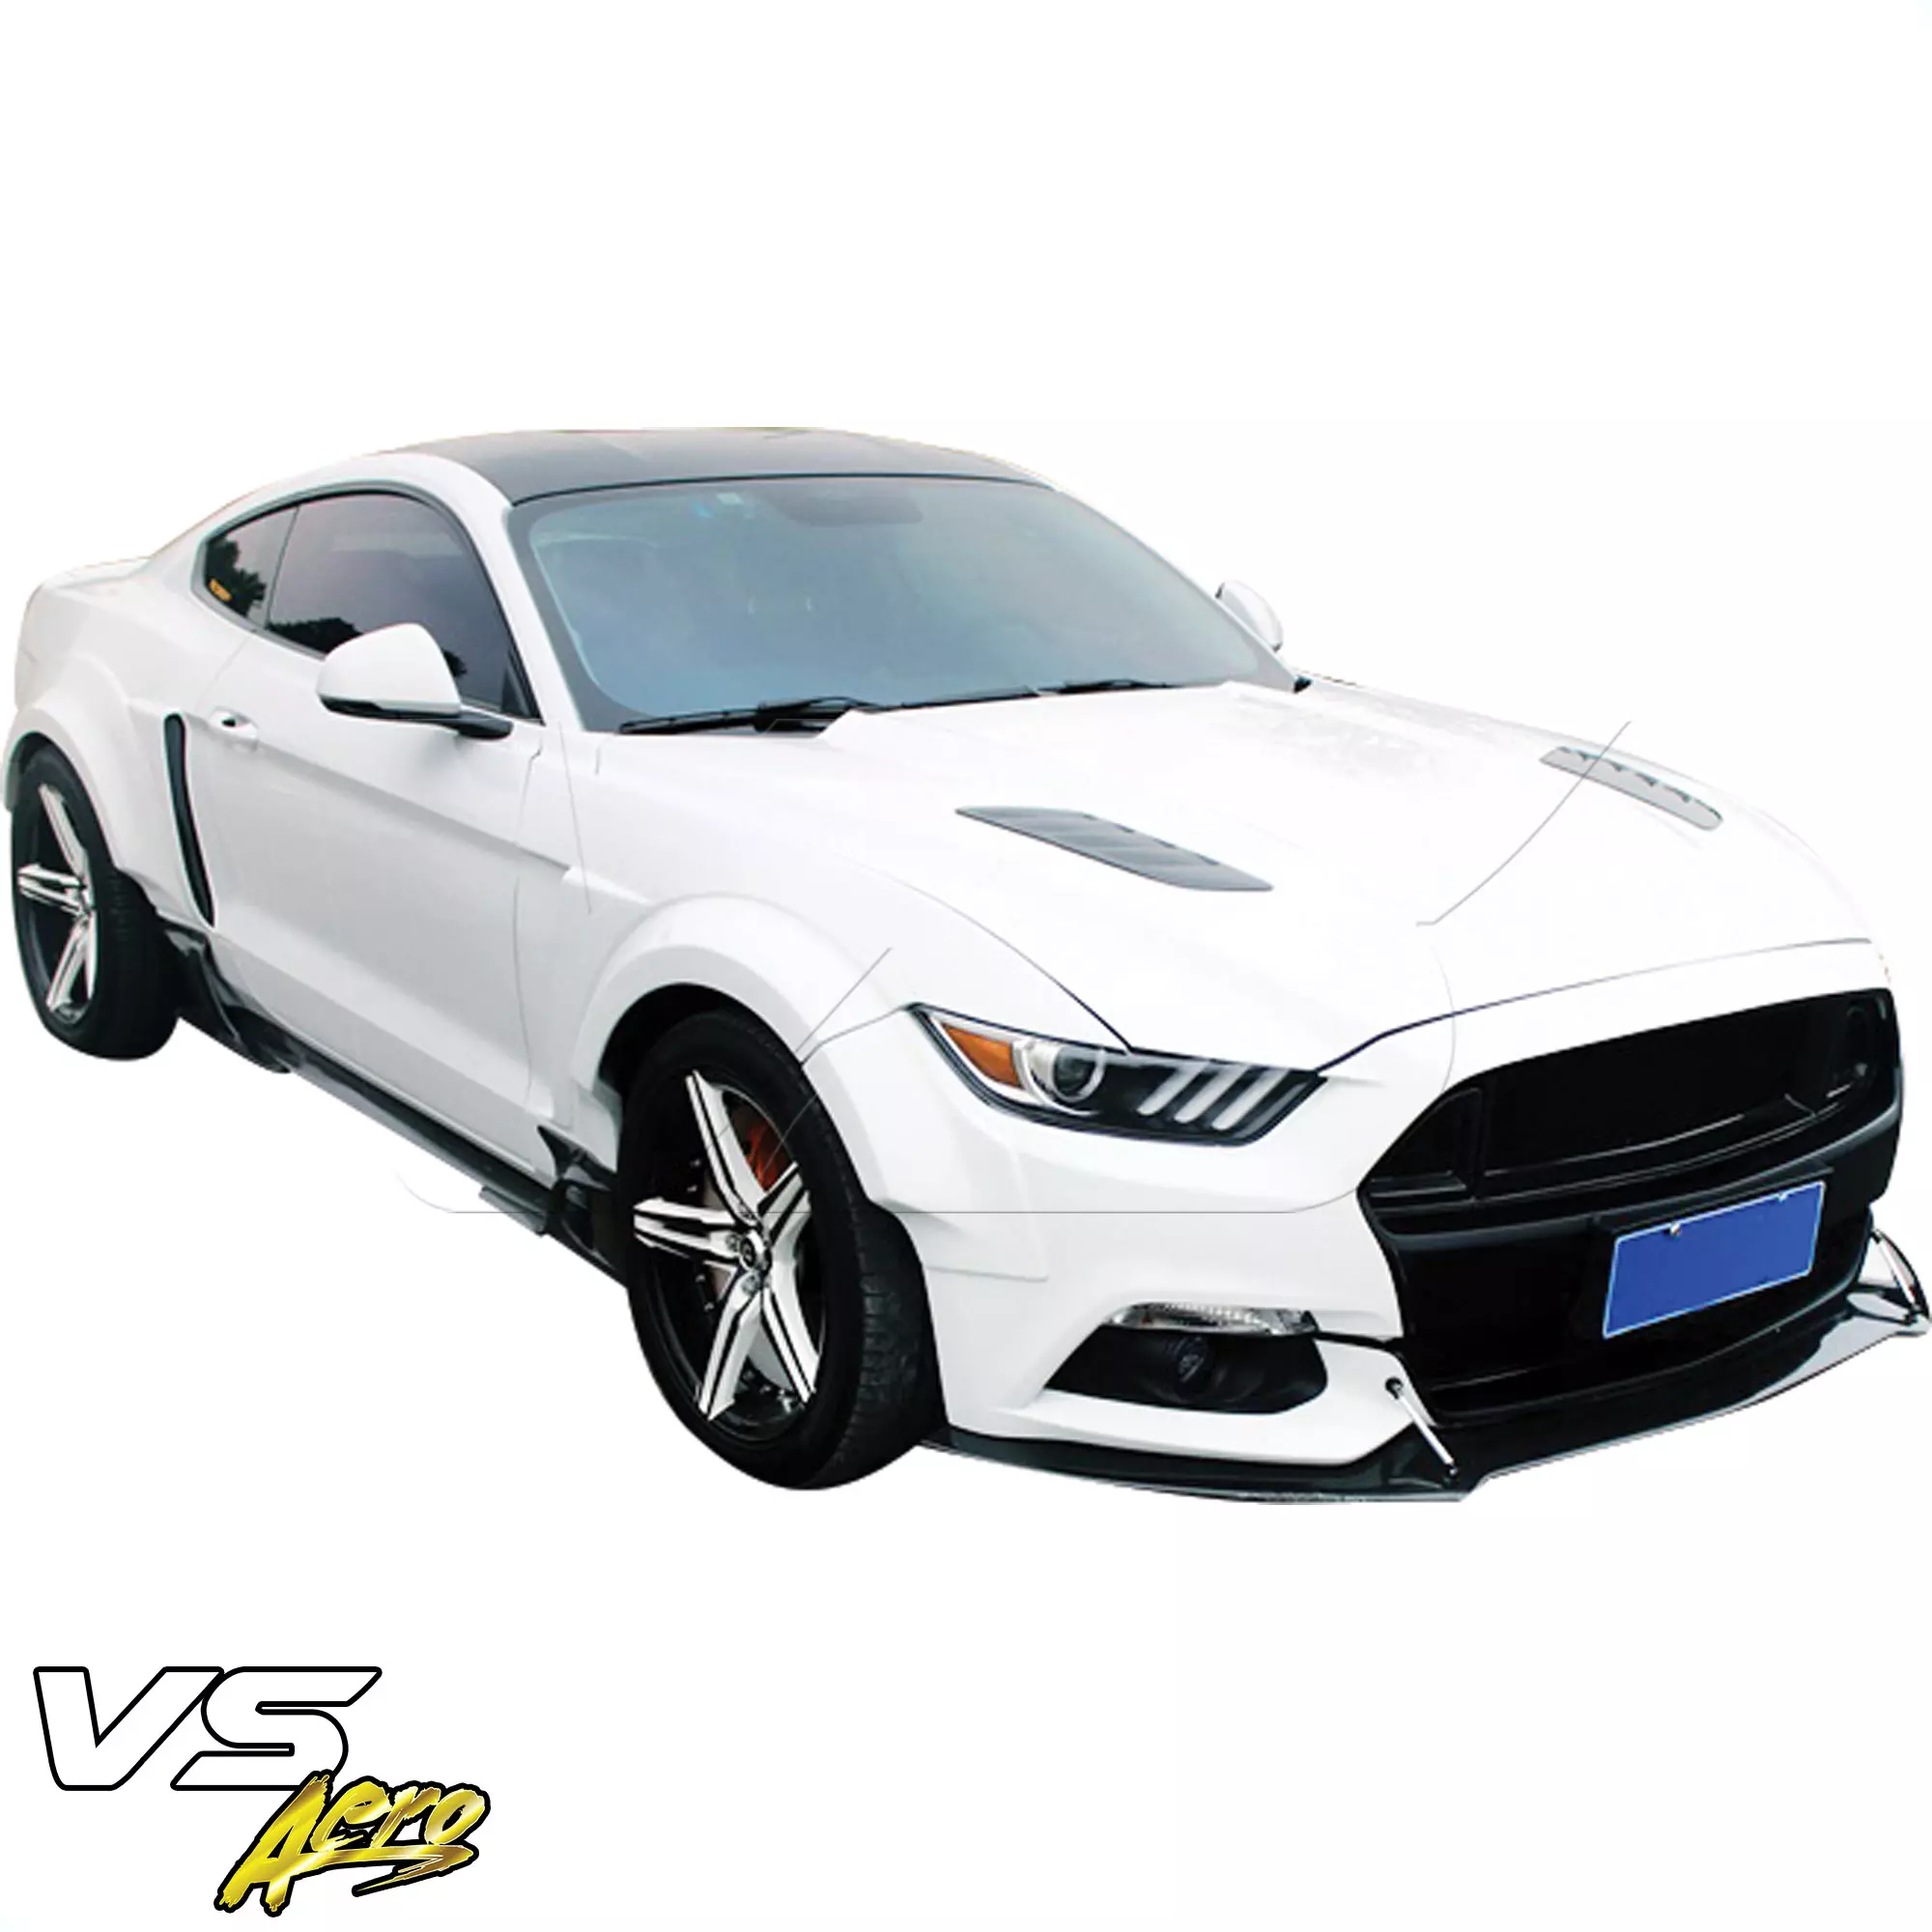 VSaero FRP KTOT Wide Body Fenders (front) > Ford Mustang 2015-2020 - Image 4